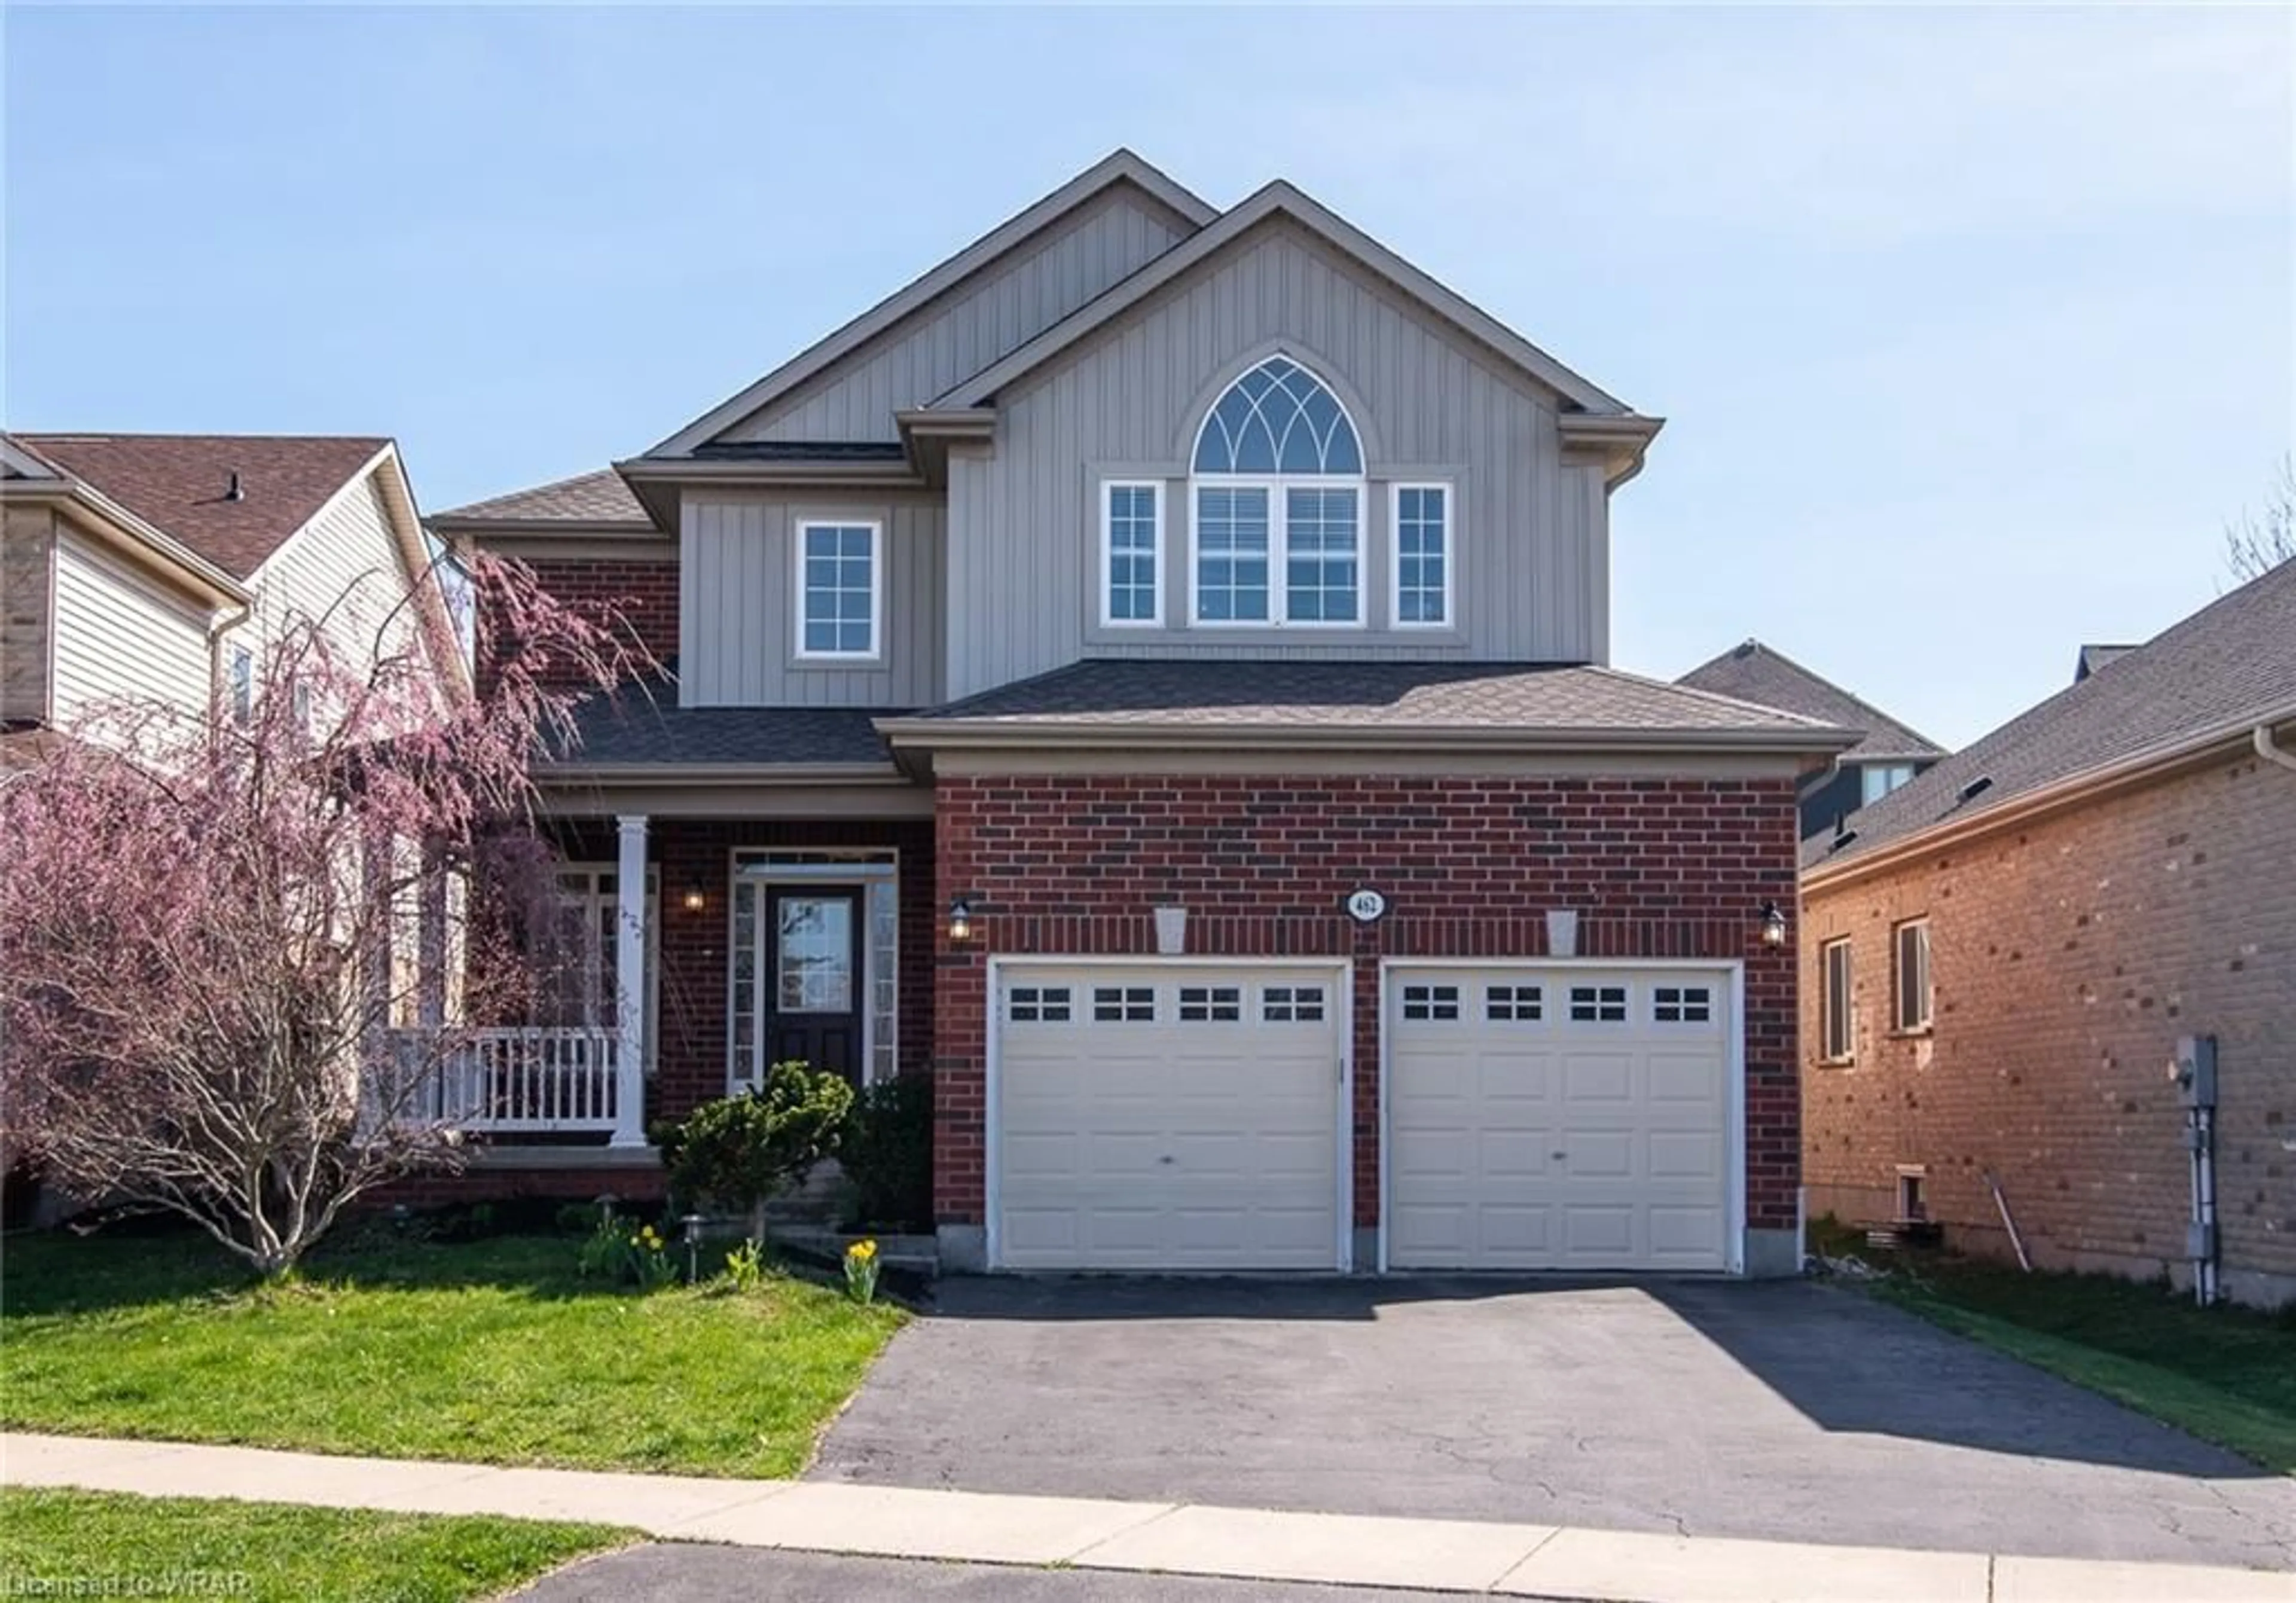 Home with brick exterior material for 462 Robert Ferrie Dr, Kitchener Ontario N2P 2Y4